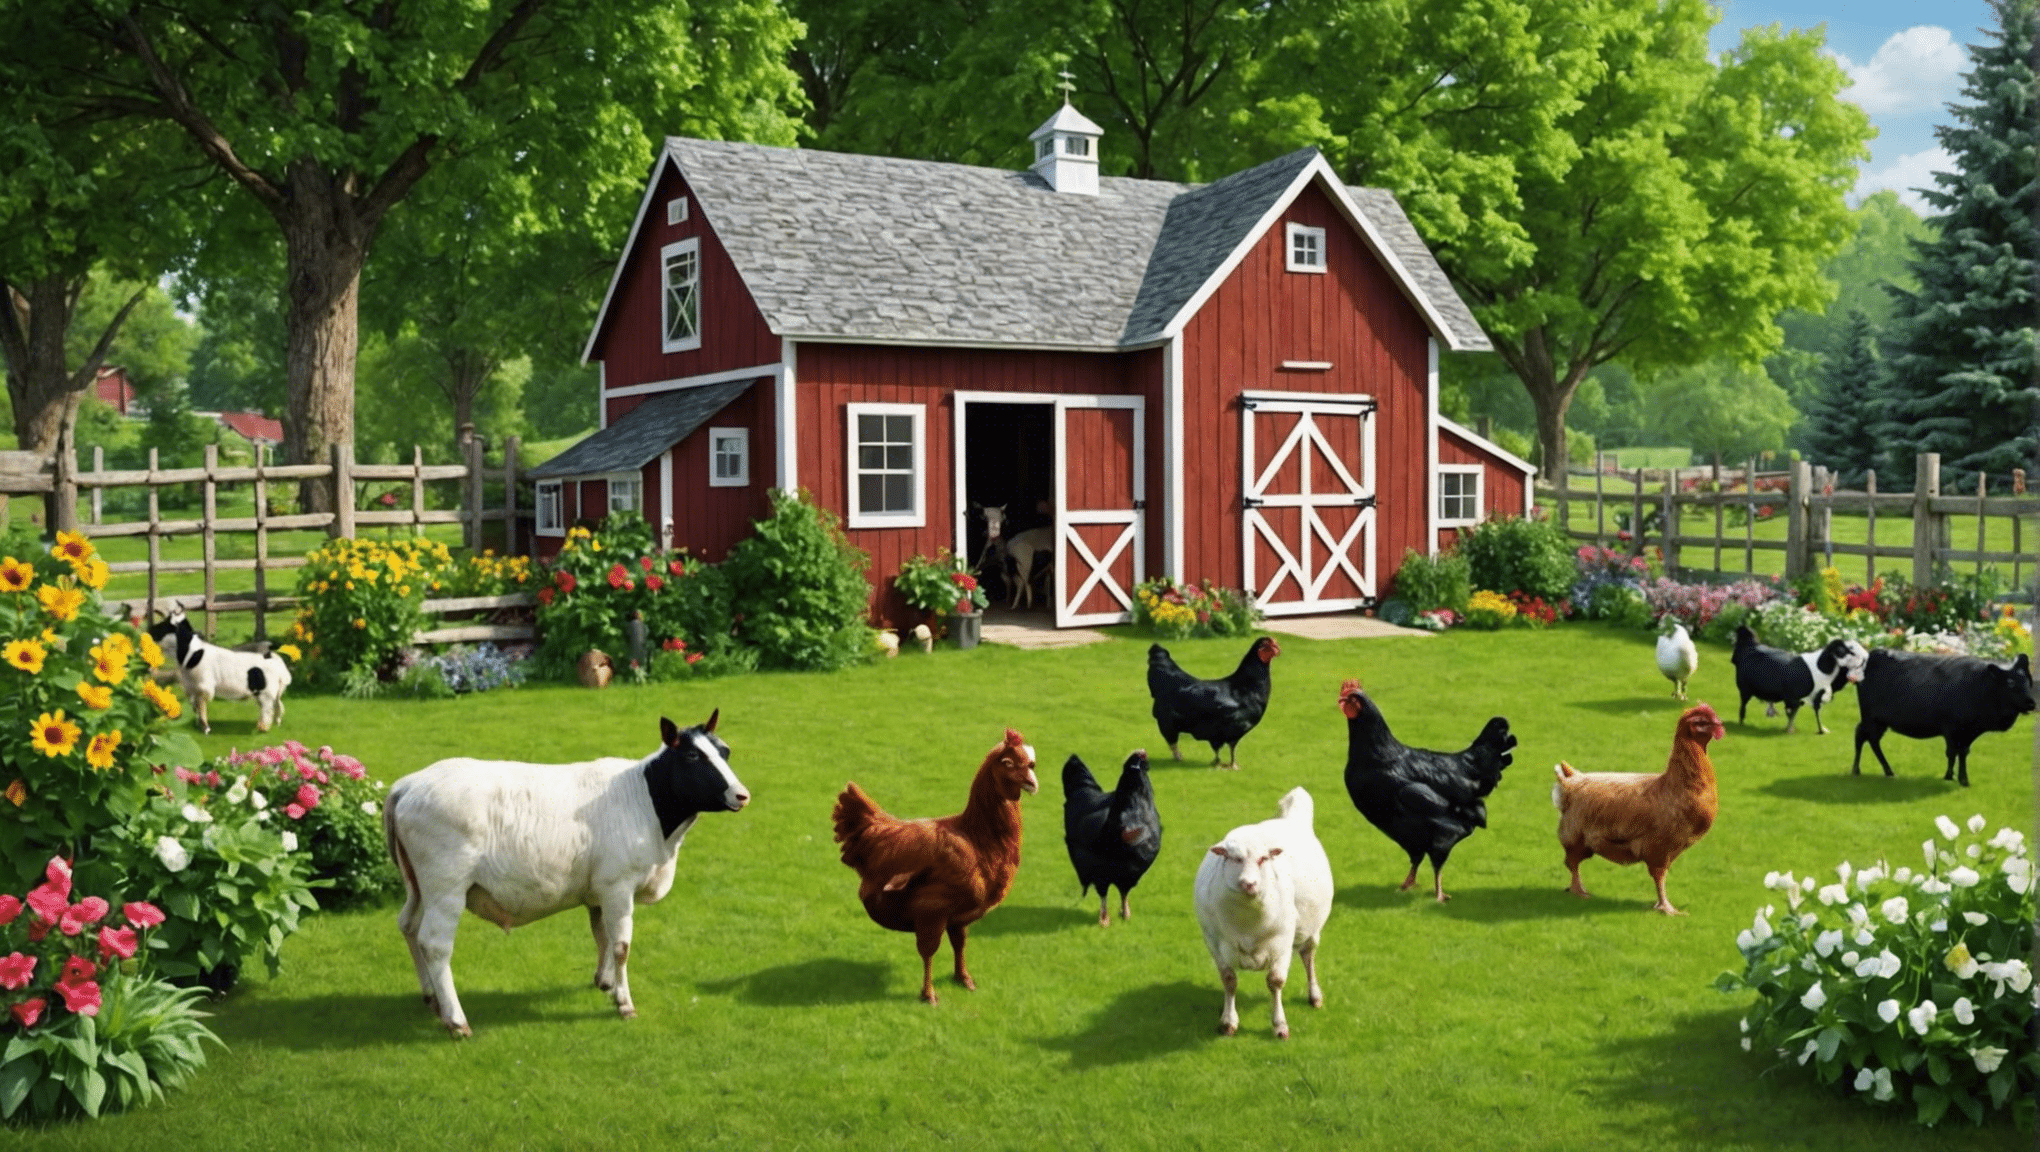 discover the benefits of having backyard farm animals for your home and family. learn about raising, caring, and enjoying farm animals in your backyard.